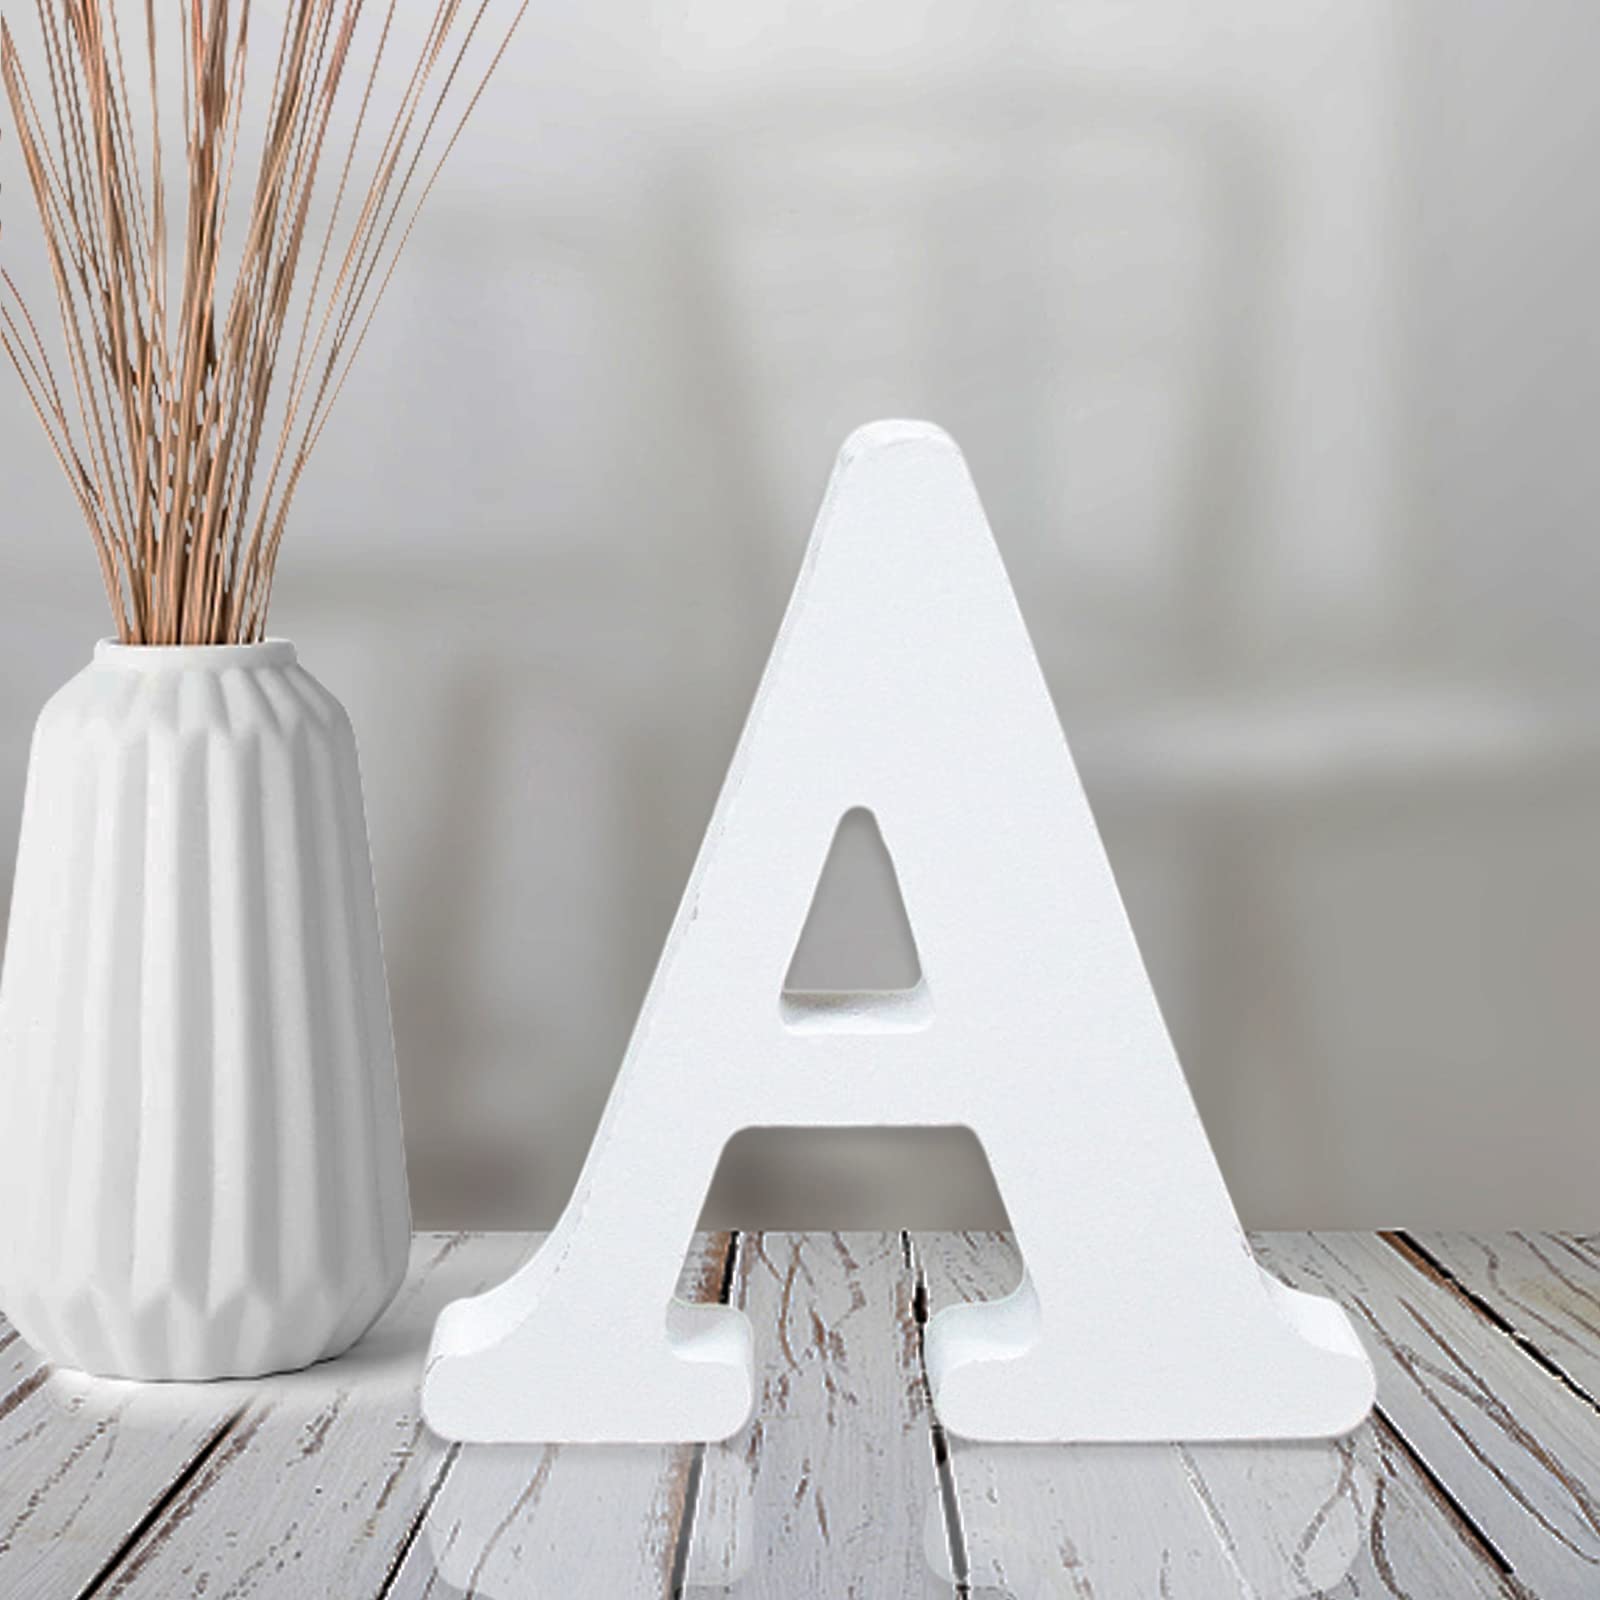 5.9 White Wall Wood Letters Free Standing Wooden Alphabet for Home Sign Unfinished Art Craft Work DIY Words Block